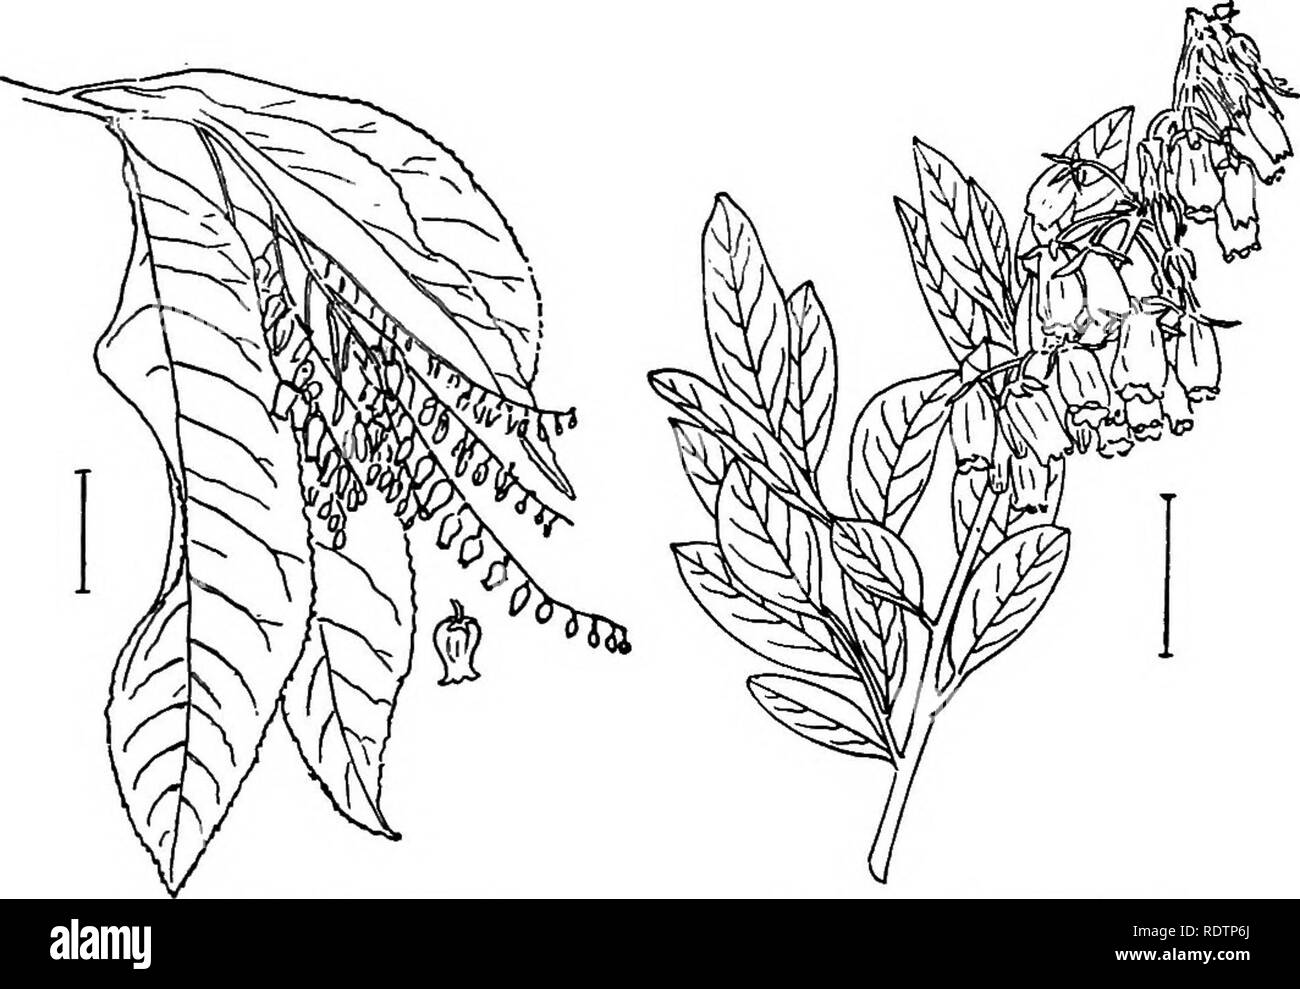 . Ornamental shrubs of the United States (hardy, cultivated). Shrubs. 252 DESCRIPTIONS OF THE SHRUBS. Fig. 427. — Sourwood. Fig. 428. — Stagger-bush. KEY TO THE ANDROMEDA-LIKE SHEUBS * Leaves thick and evergreen (Privet Andromeda of the 2d * is nearly evergreen). (A.) A. Flowers very small, J inch long, globular, nodding and clus- tered in axils of somewhat reduced leaves, Feb.-April. Shrub or tree with scurfy twigs, 5-25 feet tall. Scueft Andromeda (417) — Andromeda (Xolfama) ferruglnea. A. Flowers more elongated—usually twice as long as wide. (B.) B. Flowers in one-sided racemes. (C.) C. Flo Stock Photo